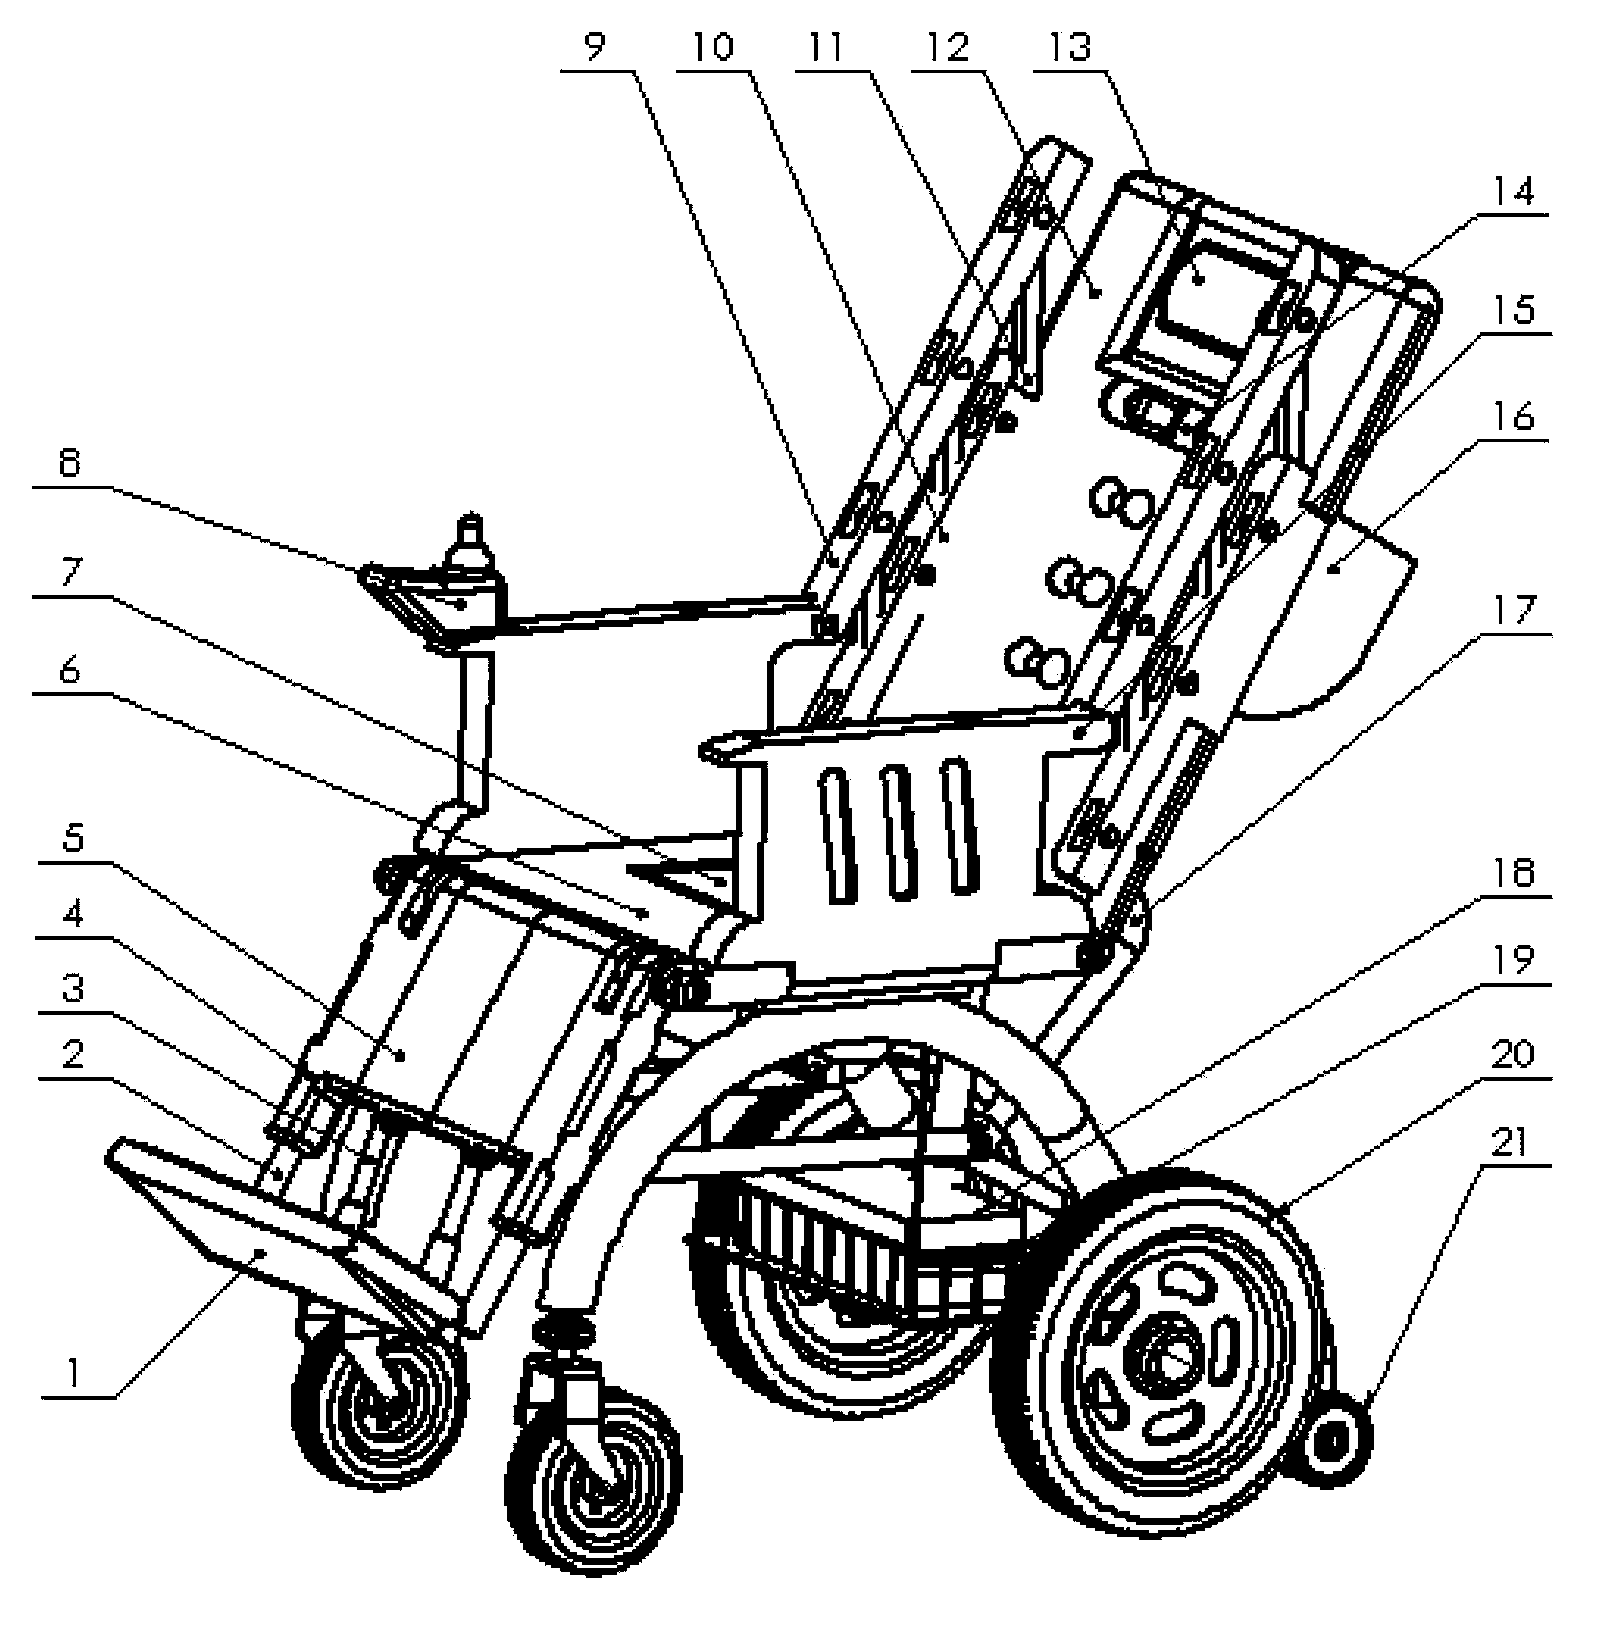 Electrically propelled wheelchair with functions of nursing bed